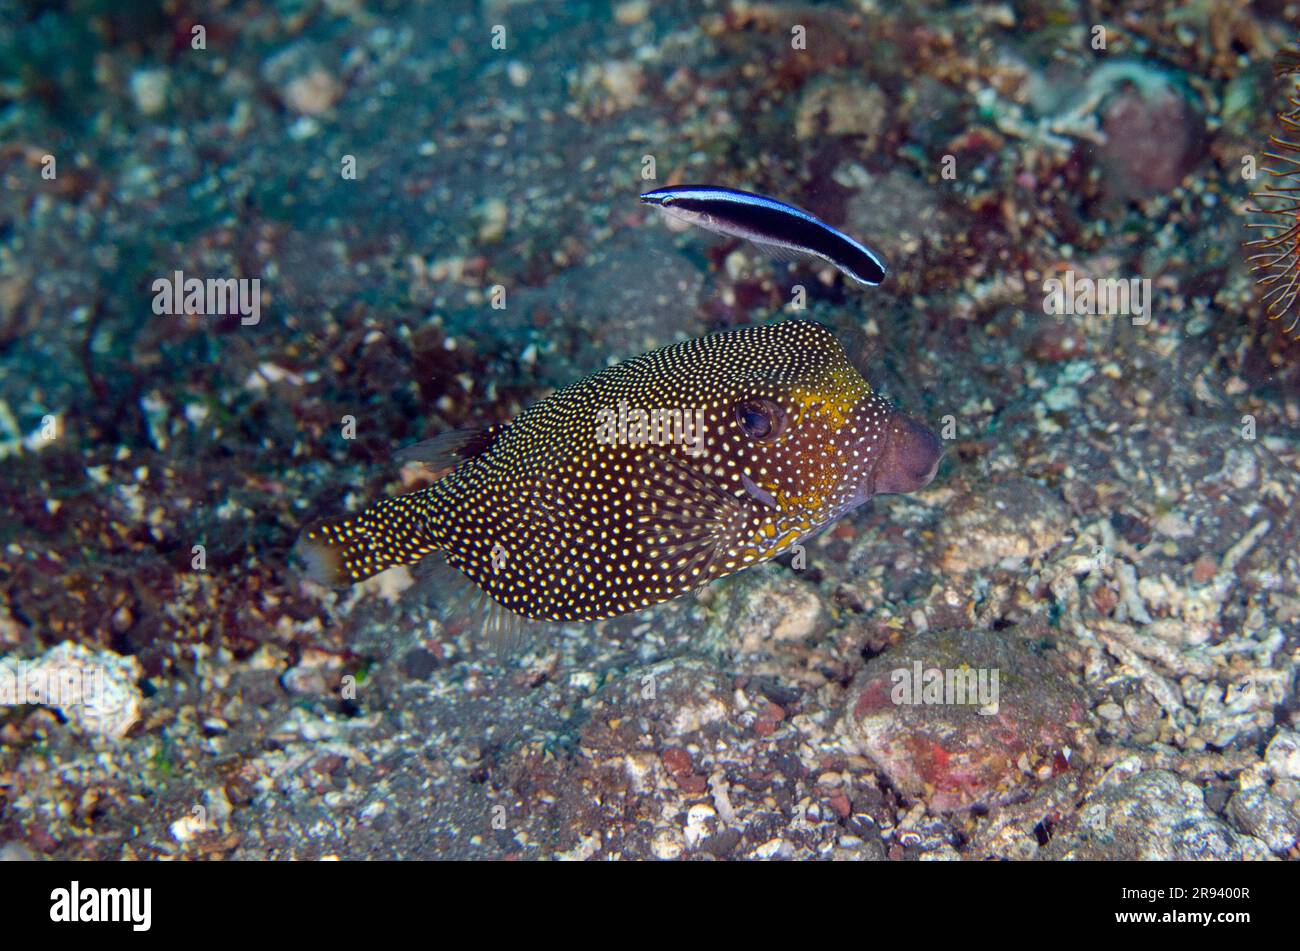 Spotted Boxfish, Ostracion meleagris, being cleaned by a Bluestreak Cleaner Wrasse, Labroides dimidiatus, Sidem Dive Site, Tulamben, Karangasem Regenc Stock Photo